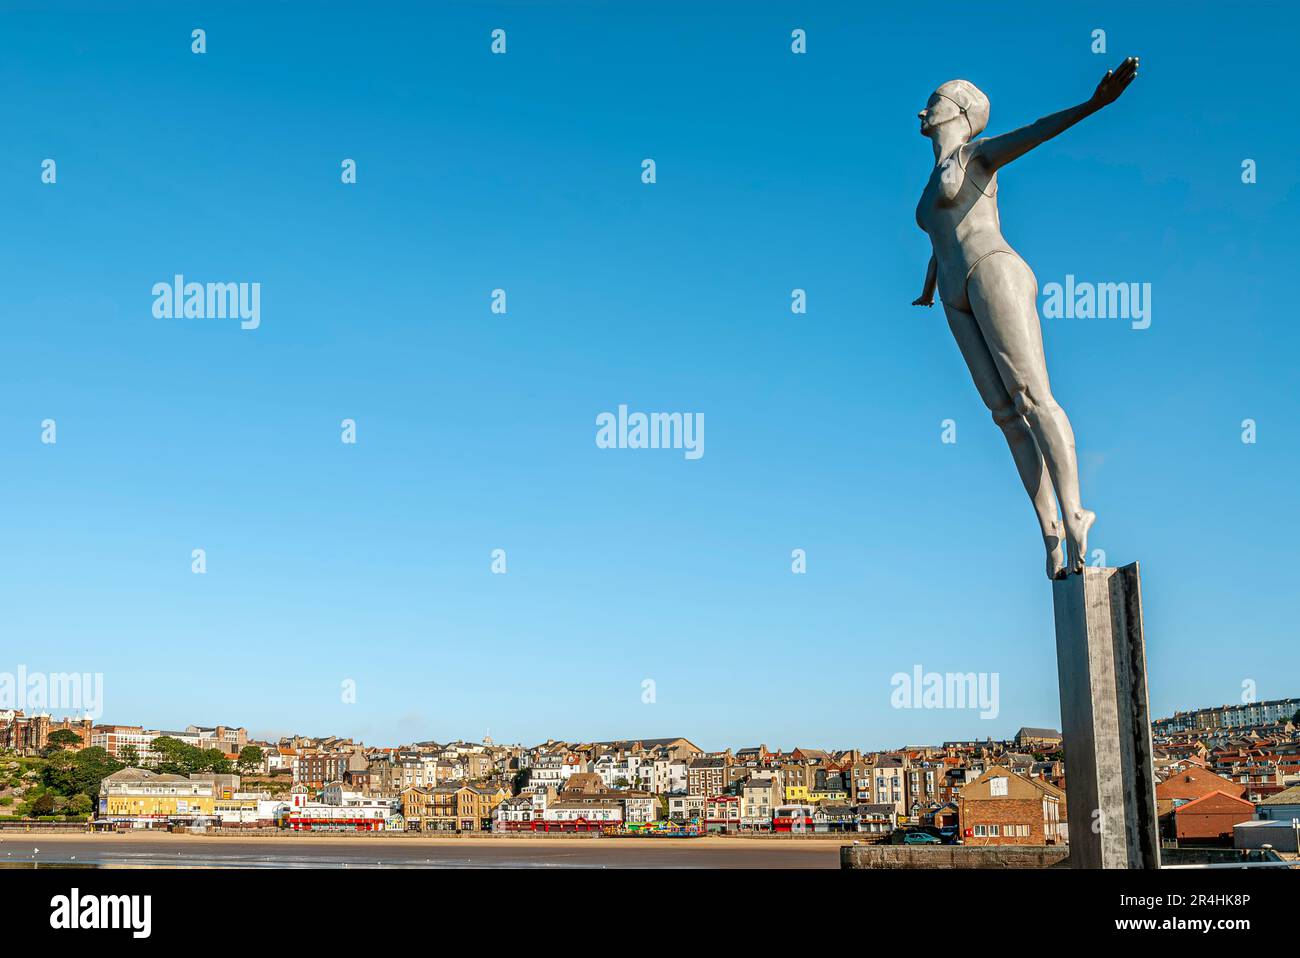 The Diving Belle Sculpture next to the Lighthouse at the harbour of Scarborough, North Yorkshire in England Stock Photo